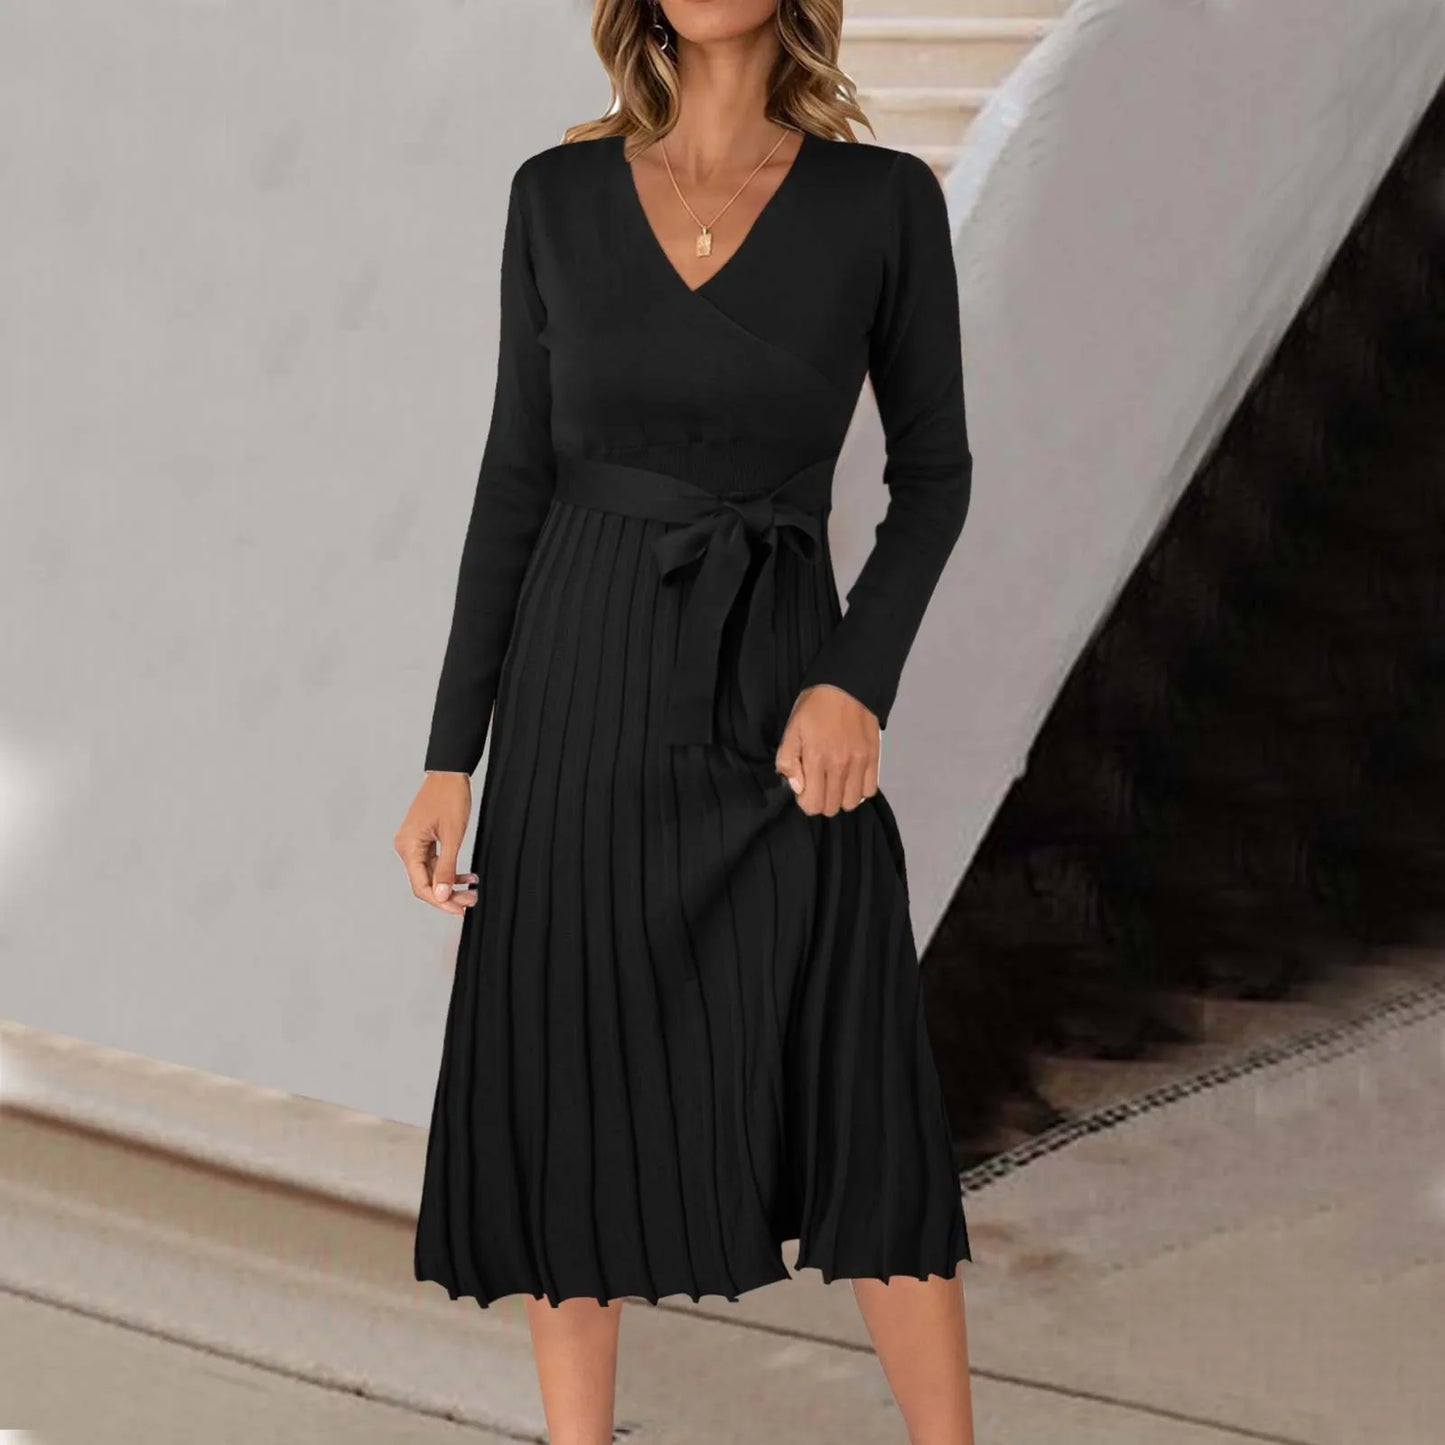 FashionSierra - Women Wrap V Neck Sweater Solid Color Long Sleeve Pleated Midi With Belt Autumn Ladies Pleated Dress For Work